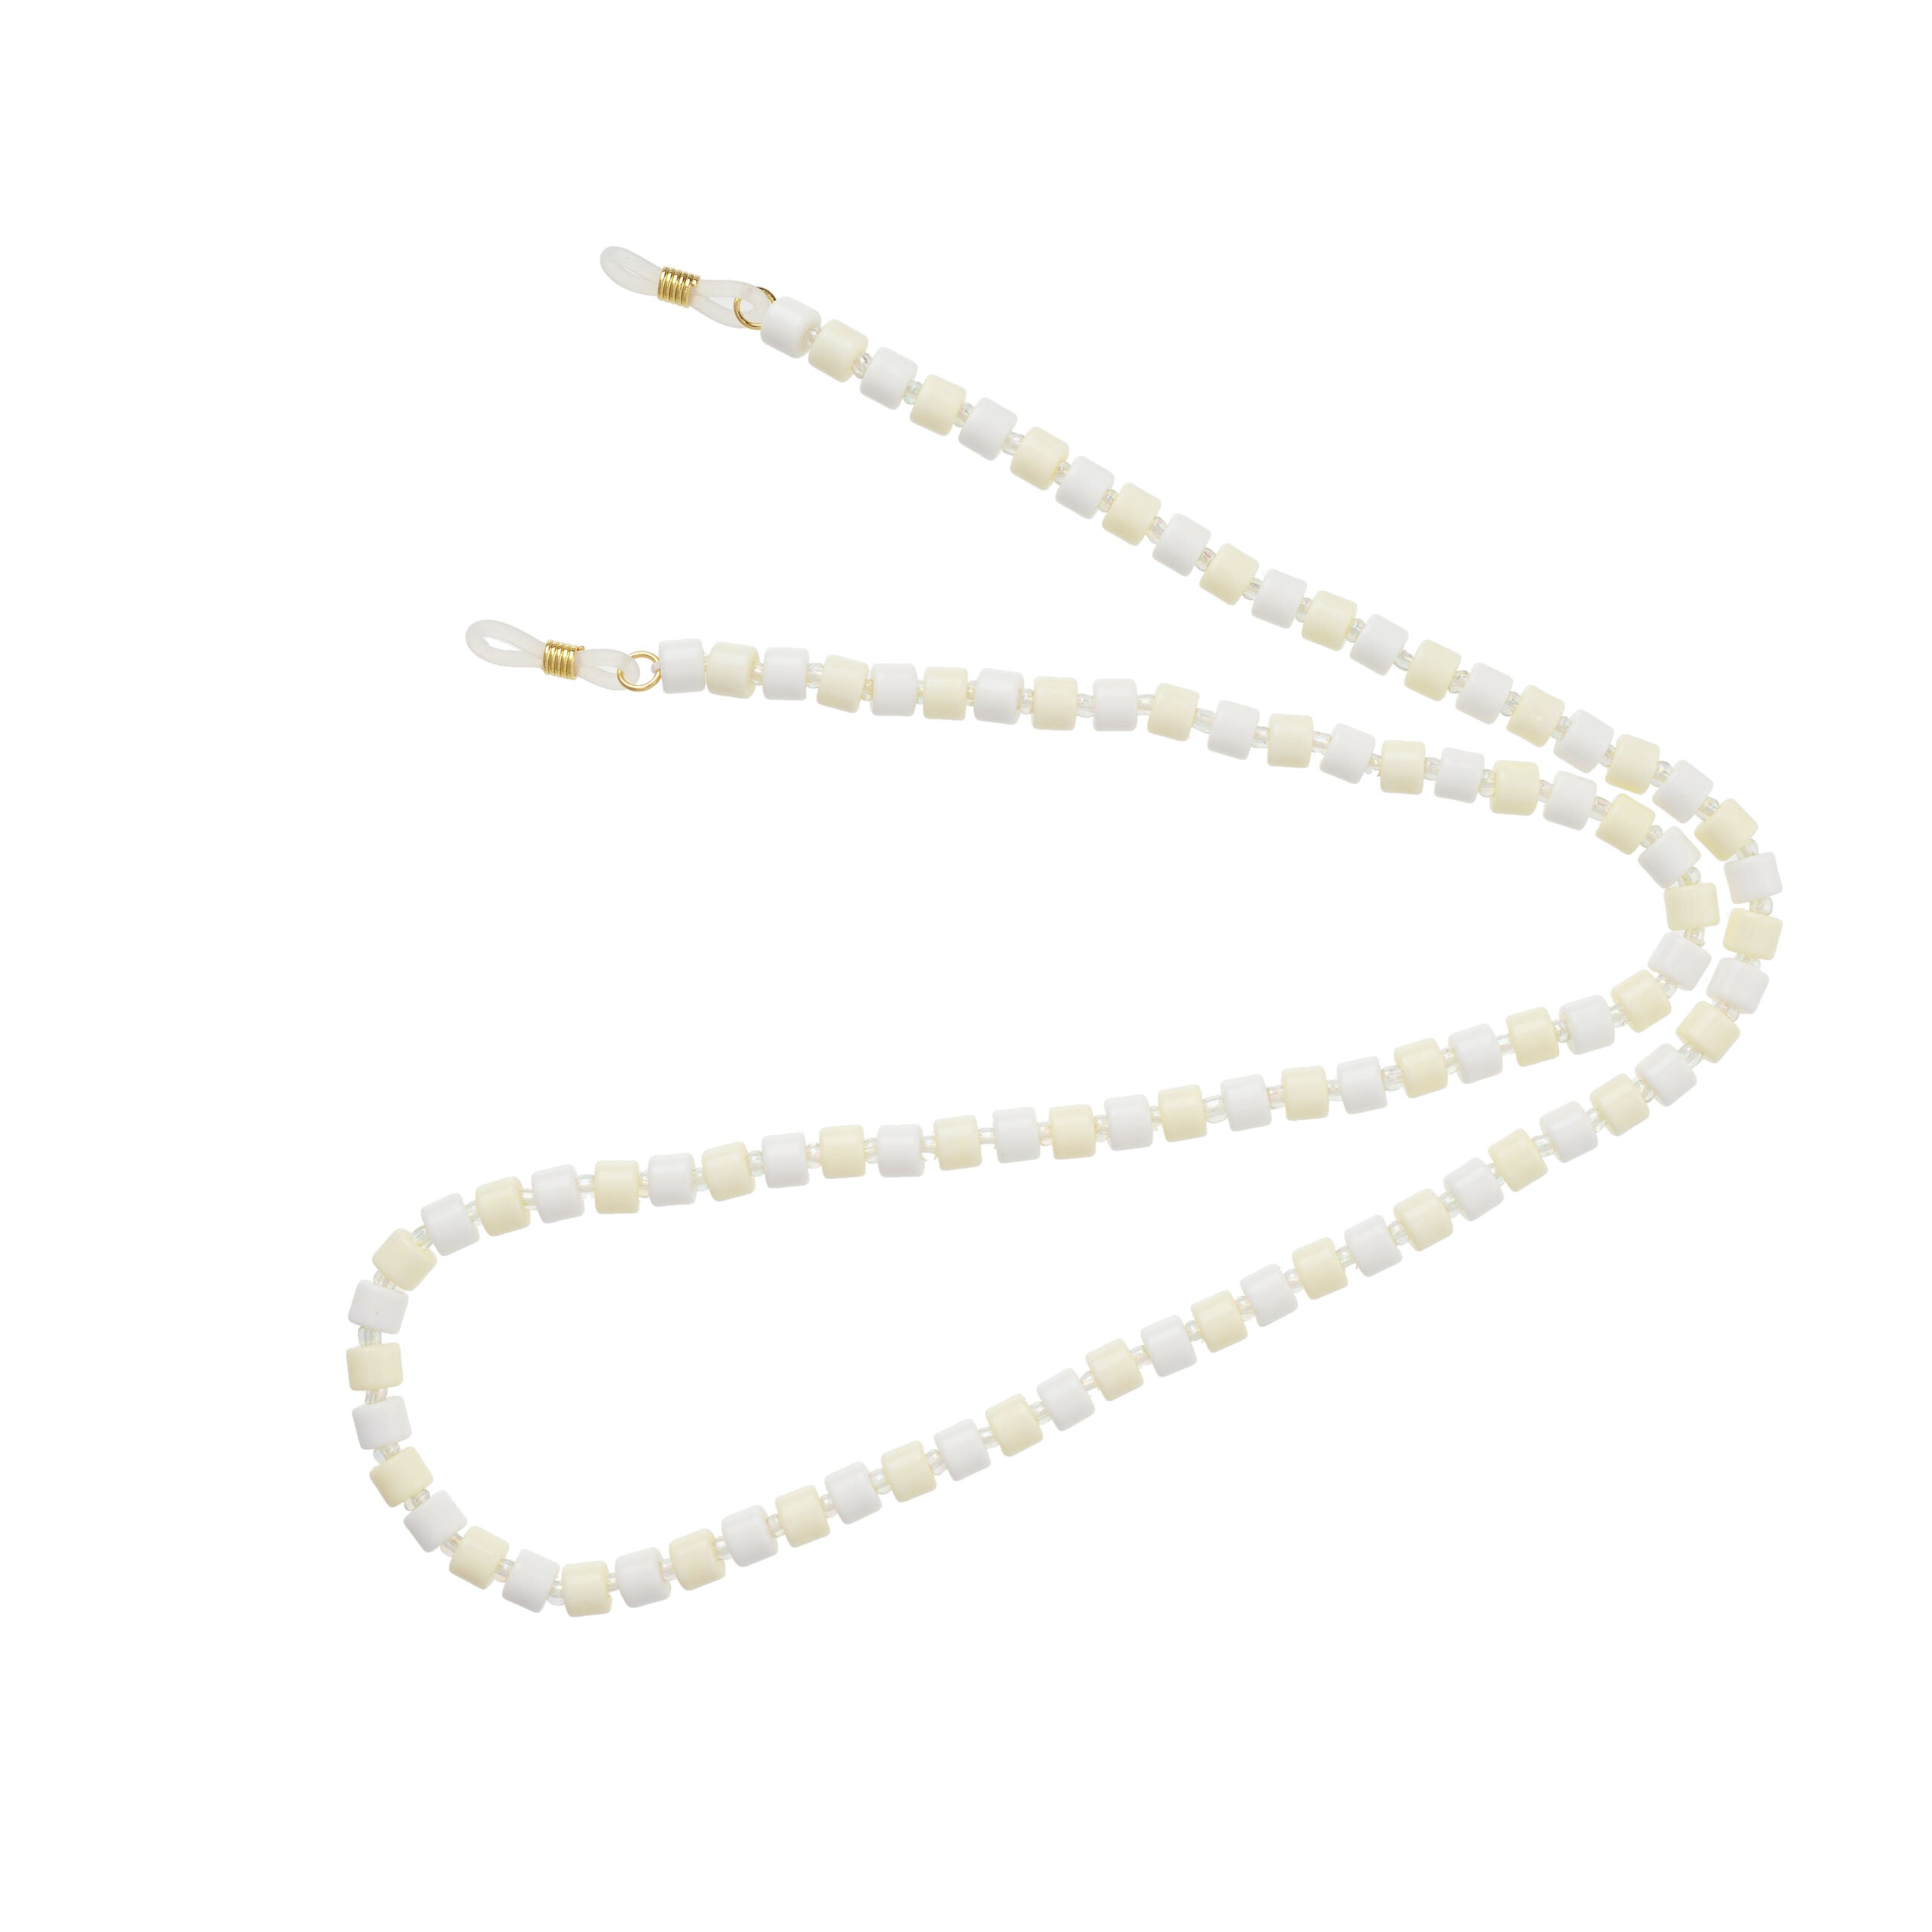 Talis Chains Crayon Sunglasses Chain- Ivory